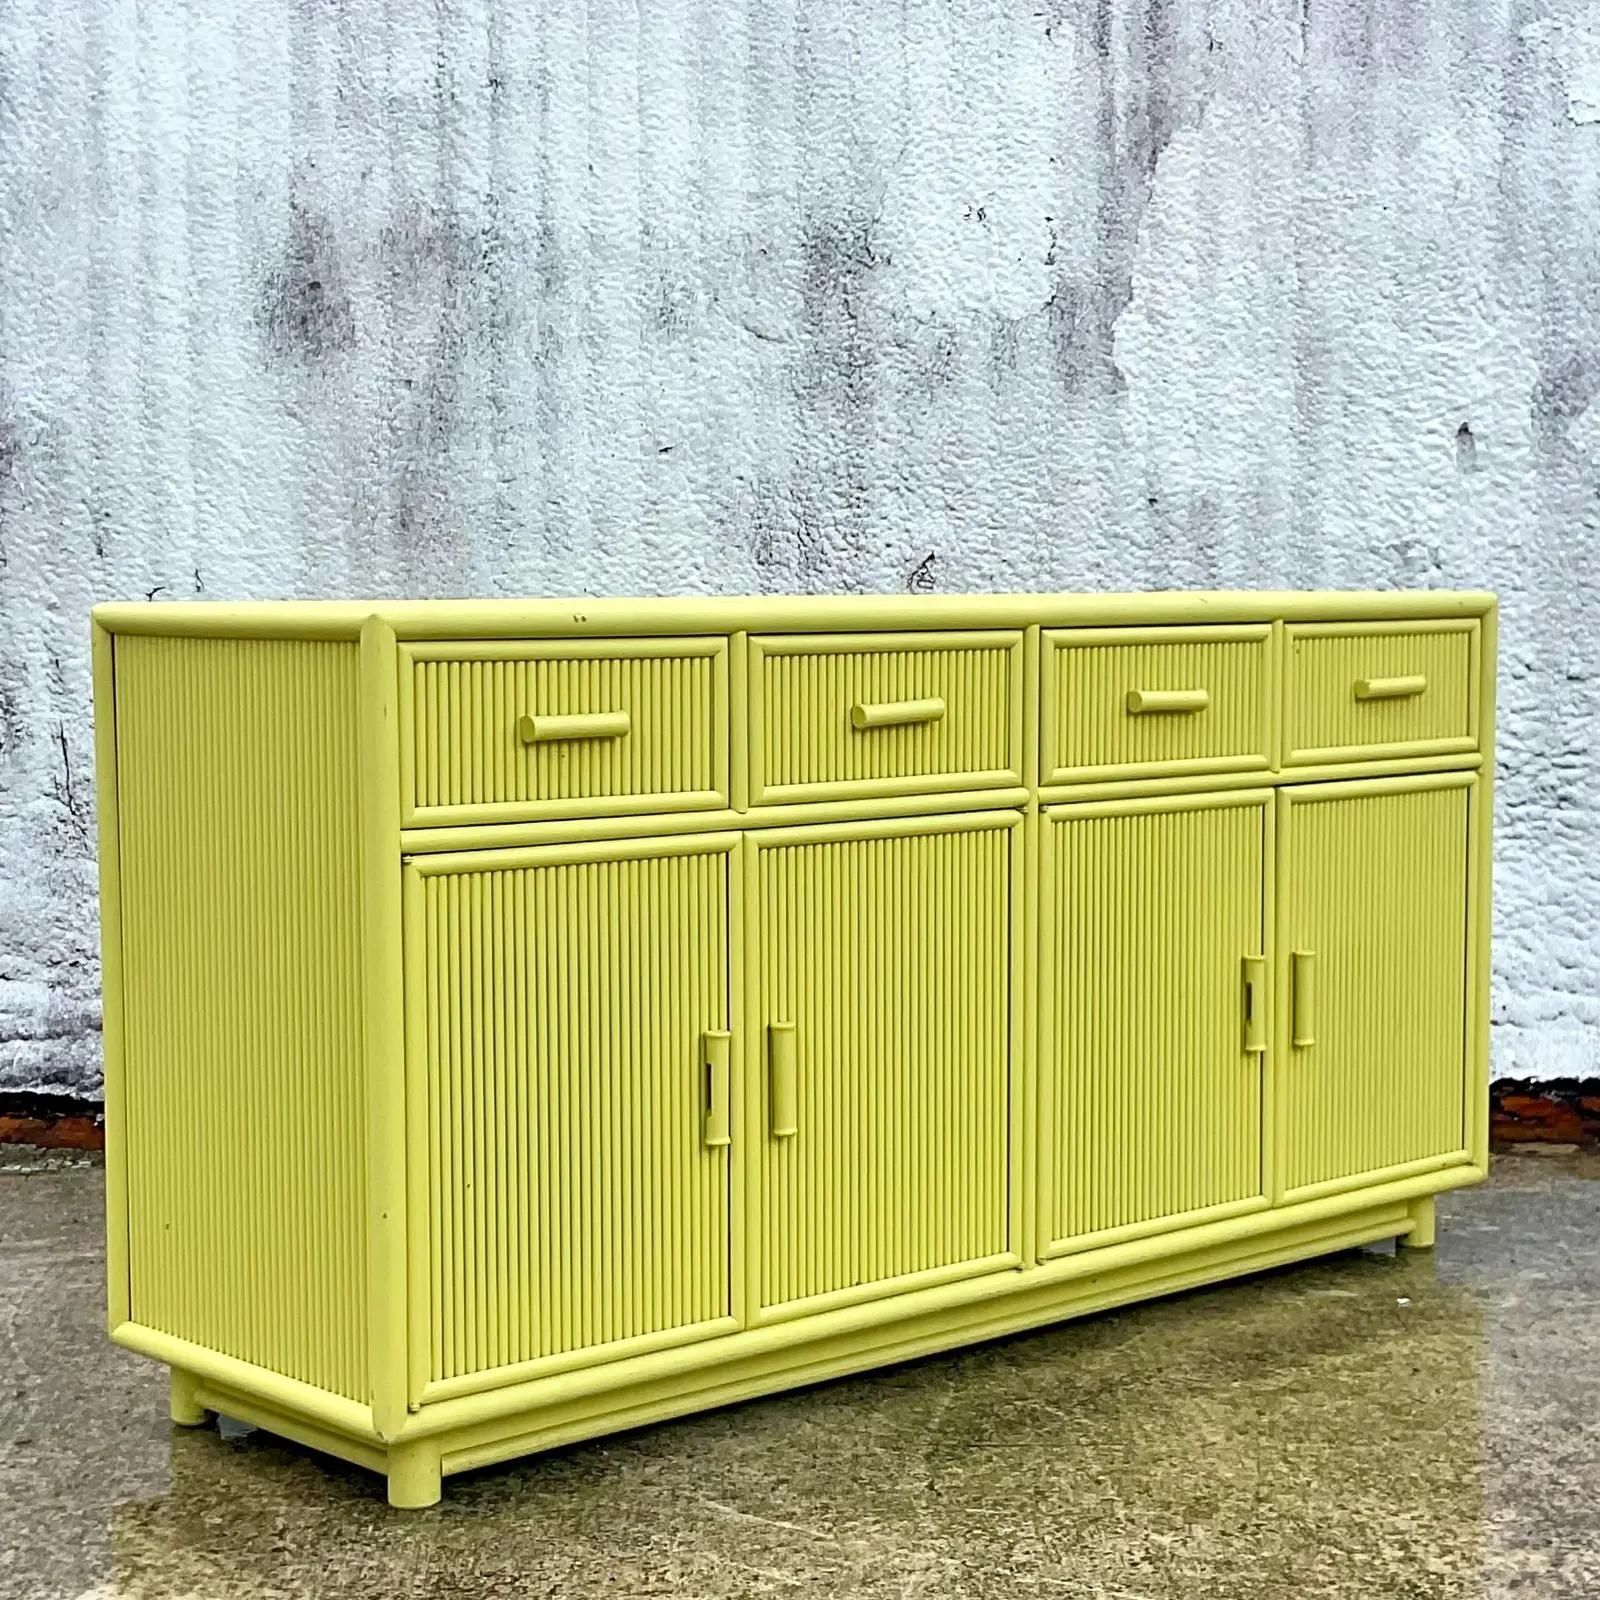 Fantastic vintage Coastal credenza. A chic rattan frame painted a brilliant Chartreuse green. Lots of great storage below. Inset glass top. Acquired from a Palm Beach estate.